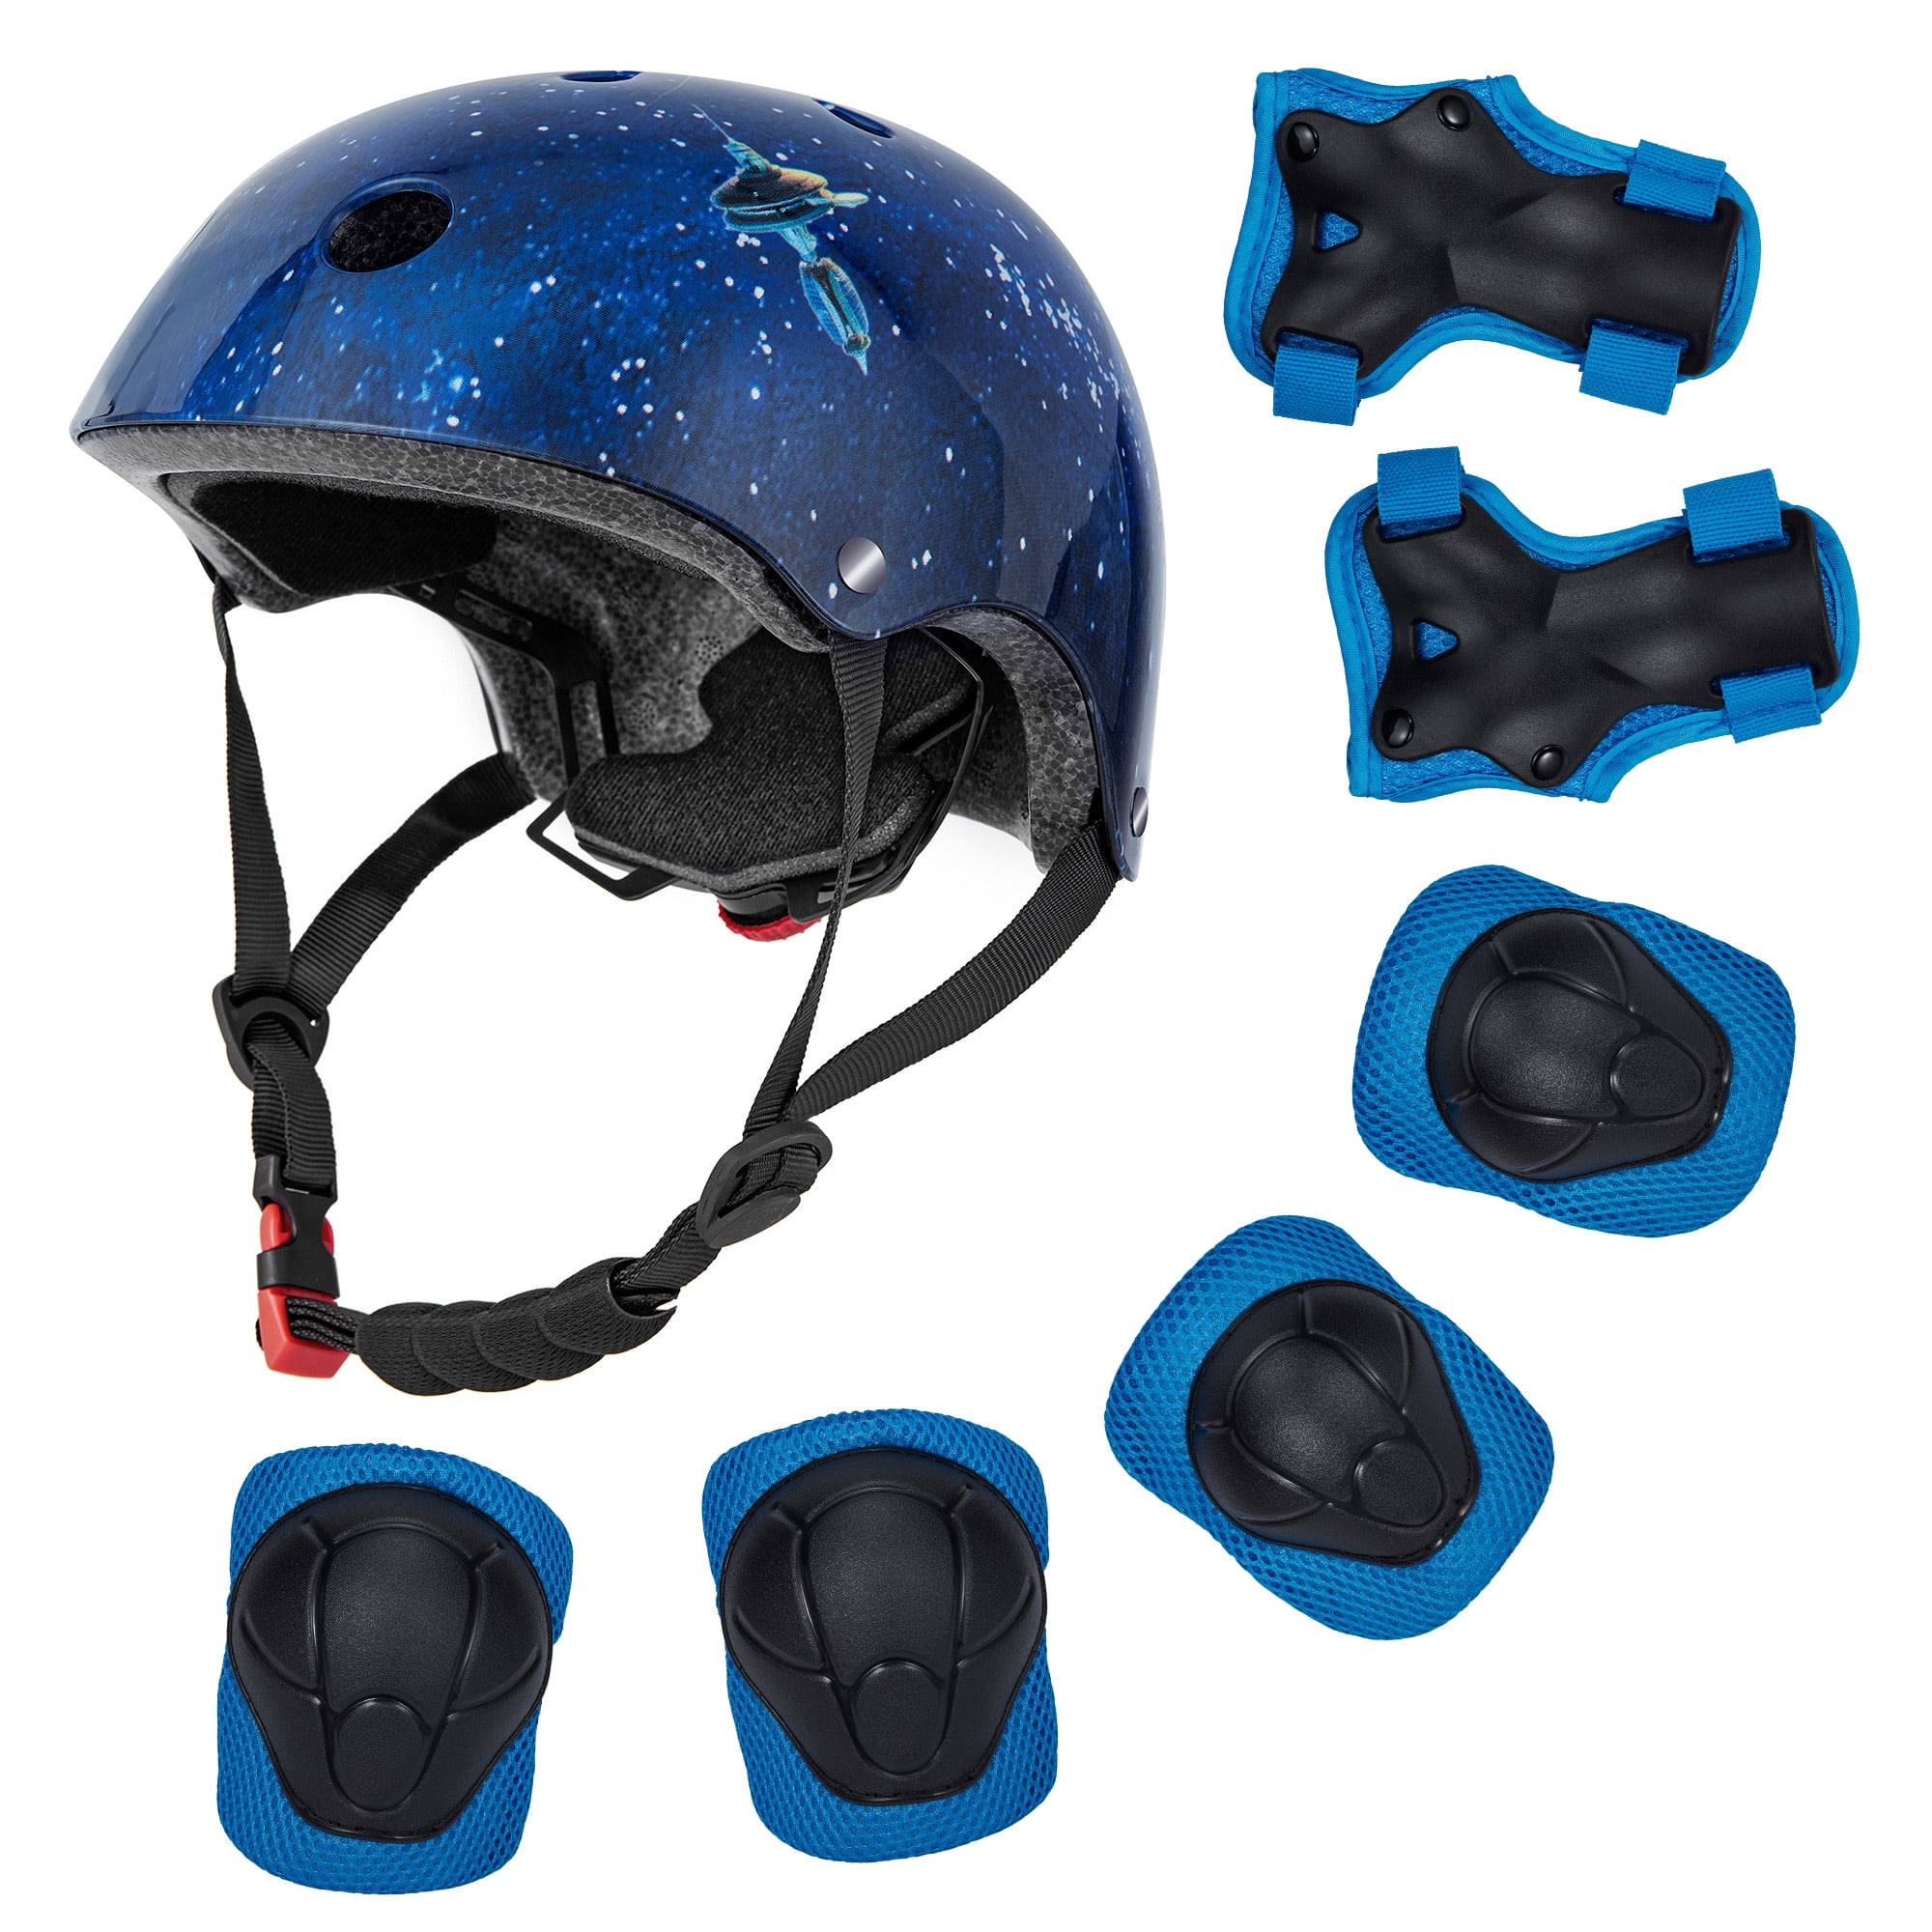 Details about   7Set Protective Gear Helmet Elbow Knee Pads Adult Kids Cycling Skate Skateboard 